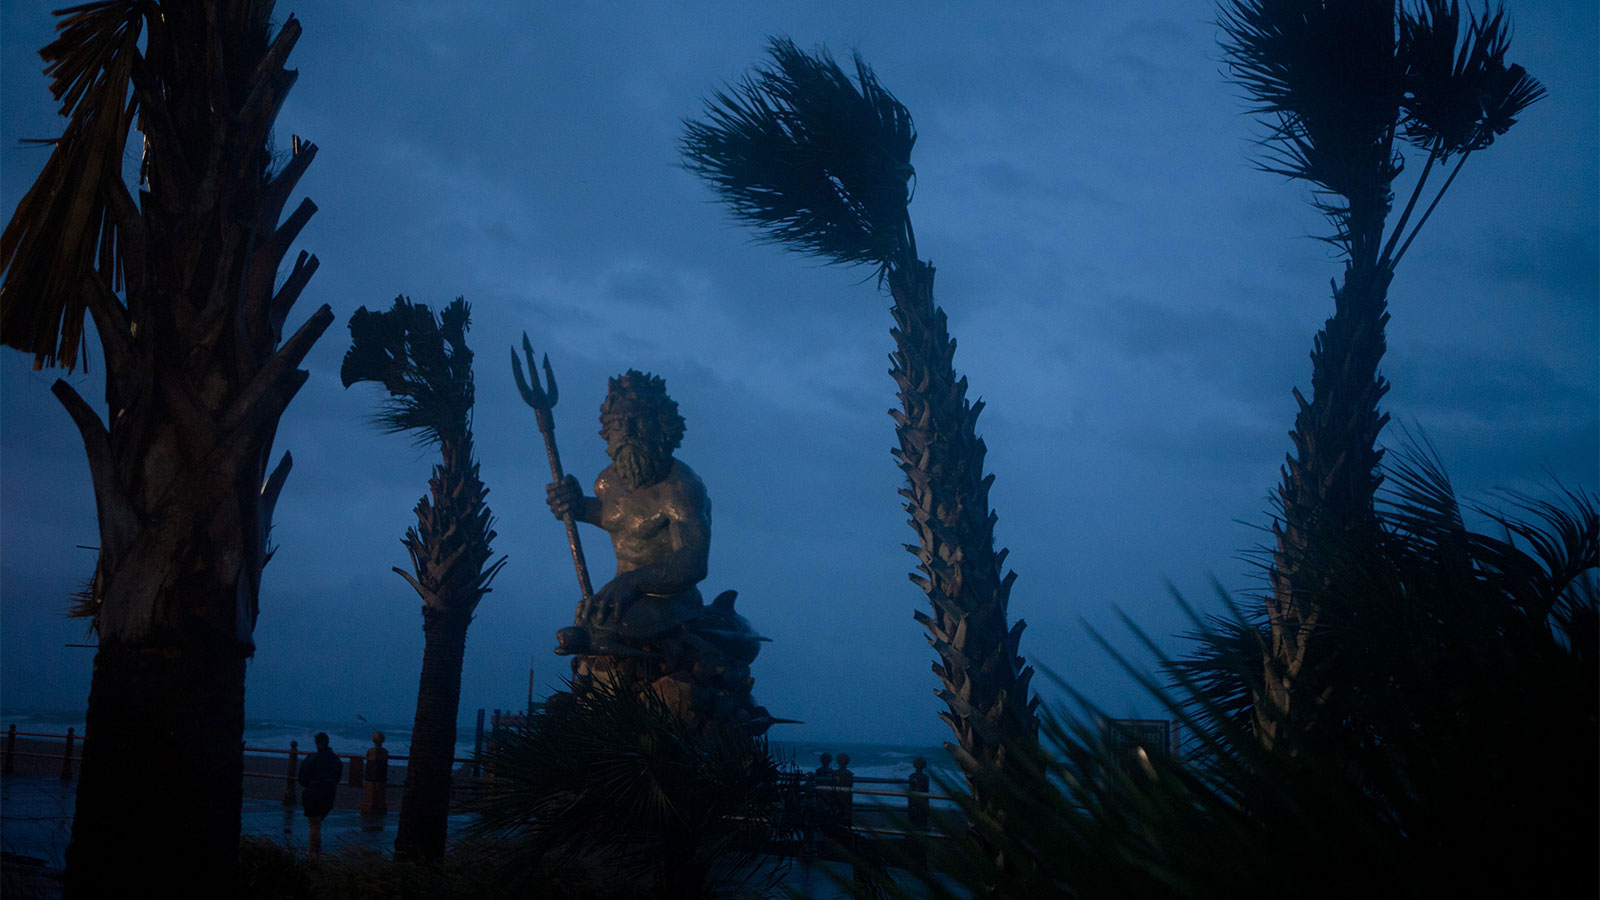 A photo of the King Neptune statue as the first wind and rain of Hurricane Irene blow in on August 27, 2011 in Virginia Beach, Virginia.